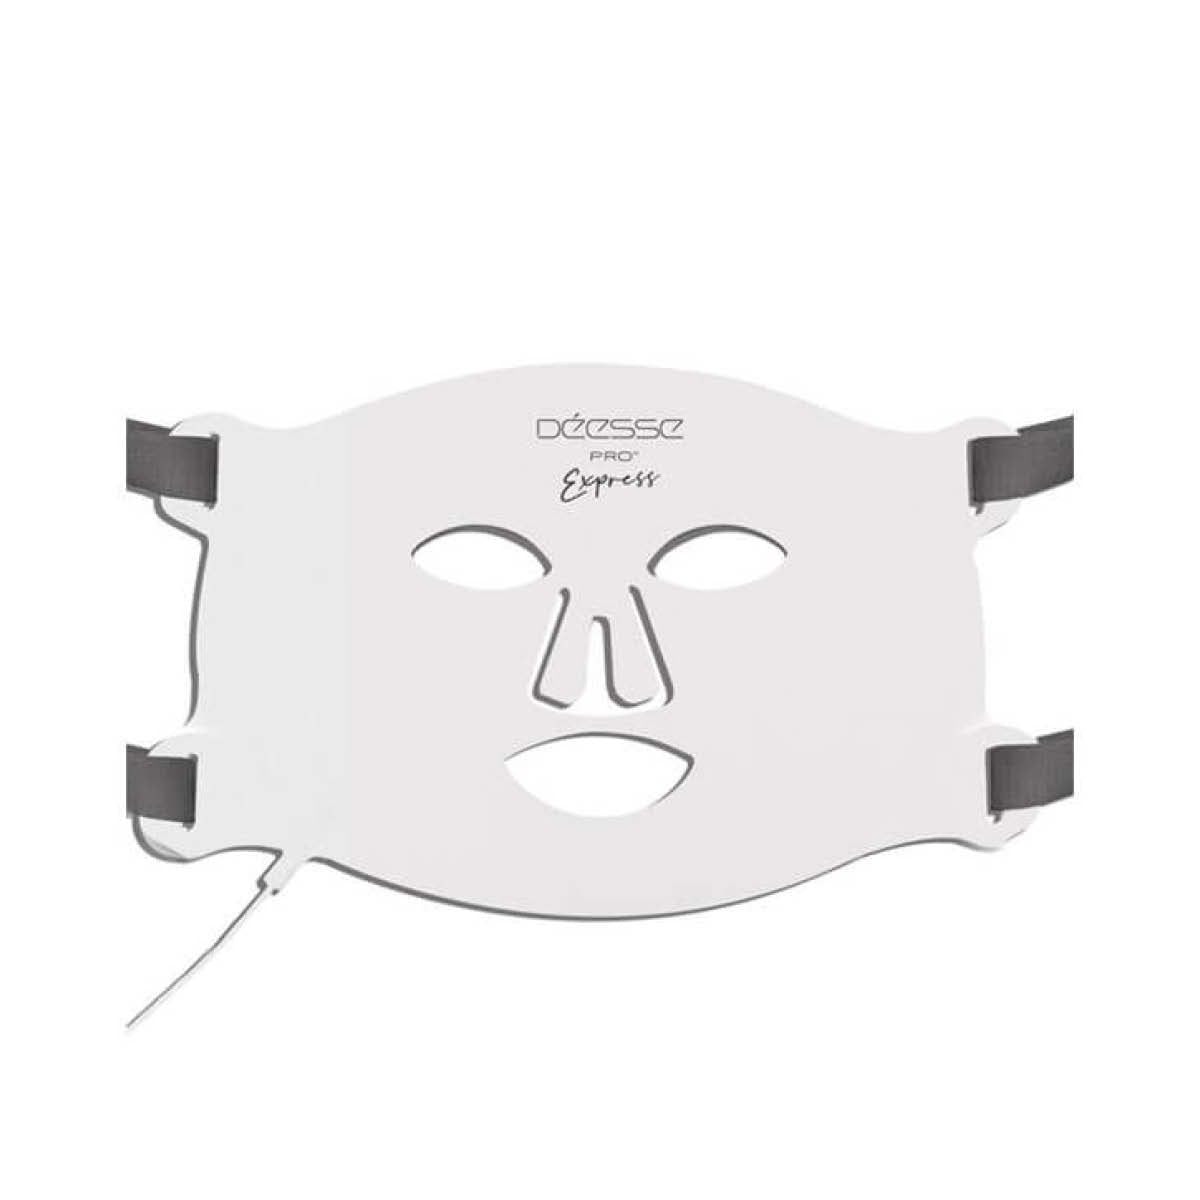 Deesse Pro Express Light Therapy LED Mask